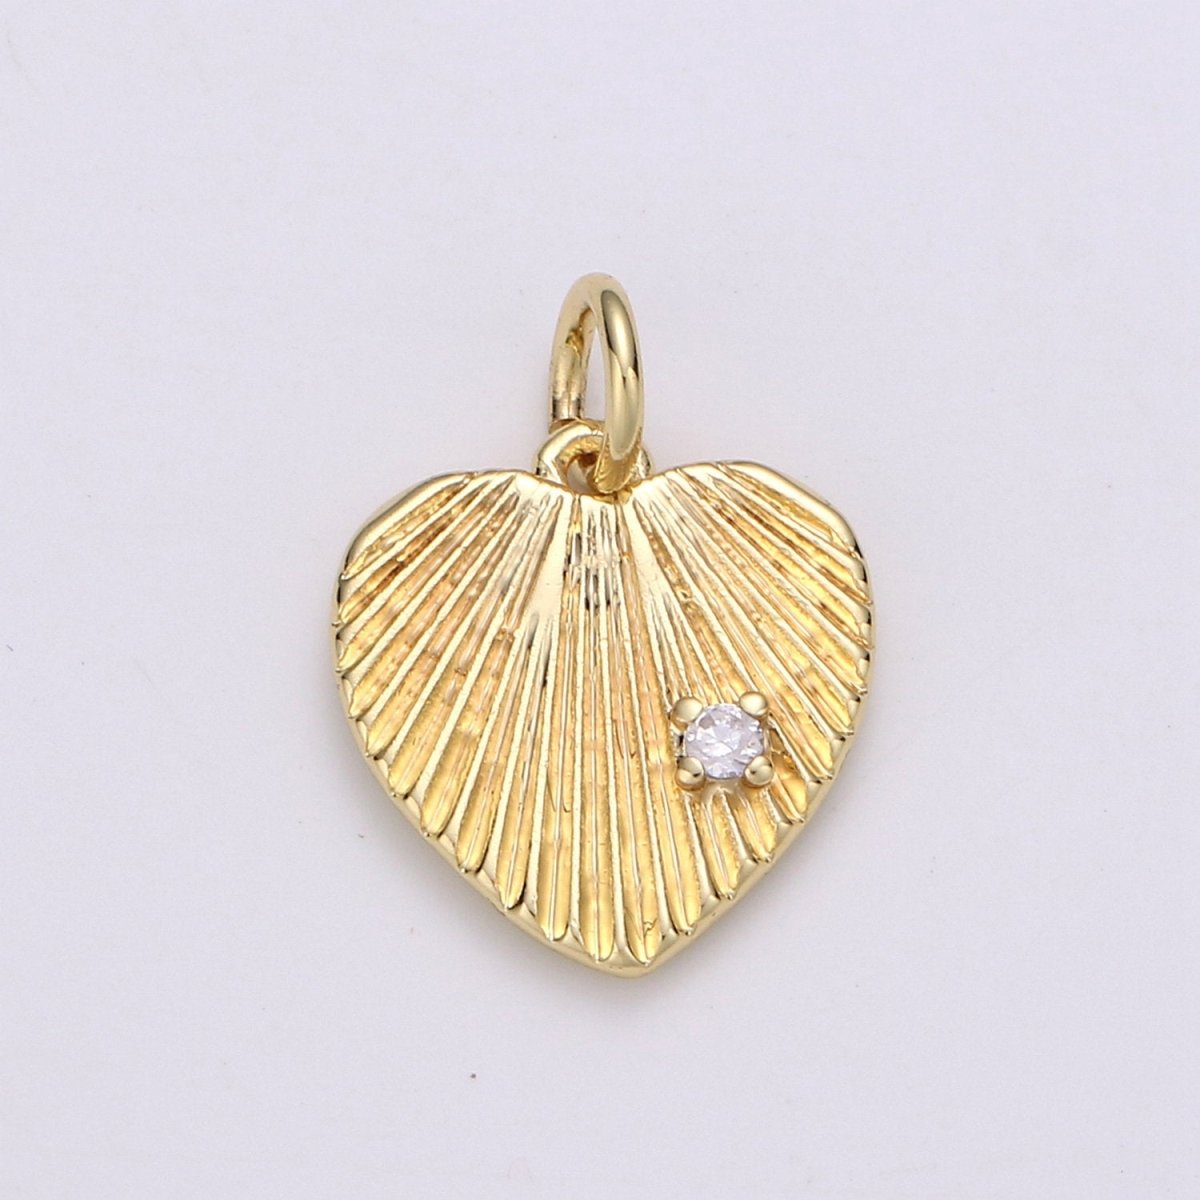 17X12mm 24k Gold Filled Heart Charms, Love Pendant, Dainty Heart Pendant Cubic Heart Charm for Bracelet Earring Necklace supply D-412 - DLUXCA